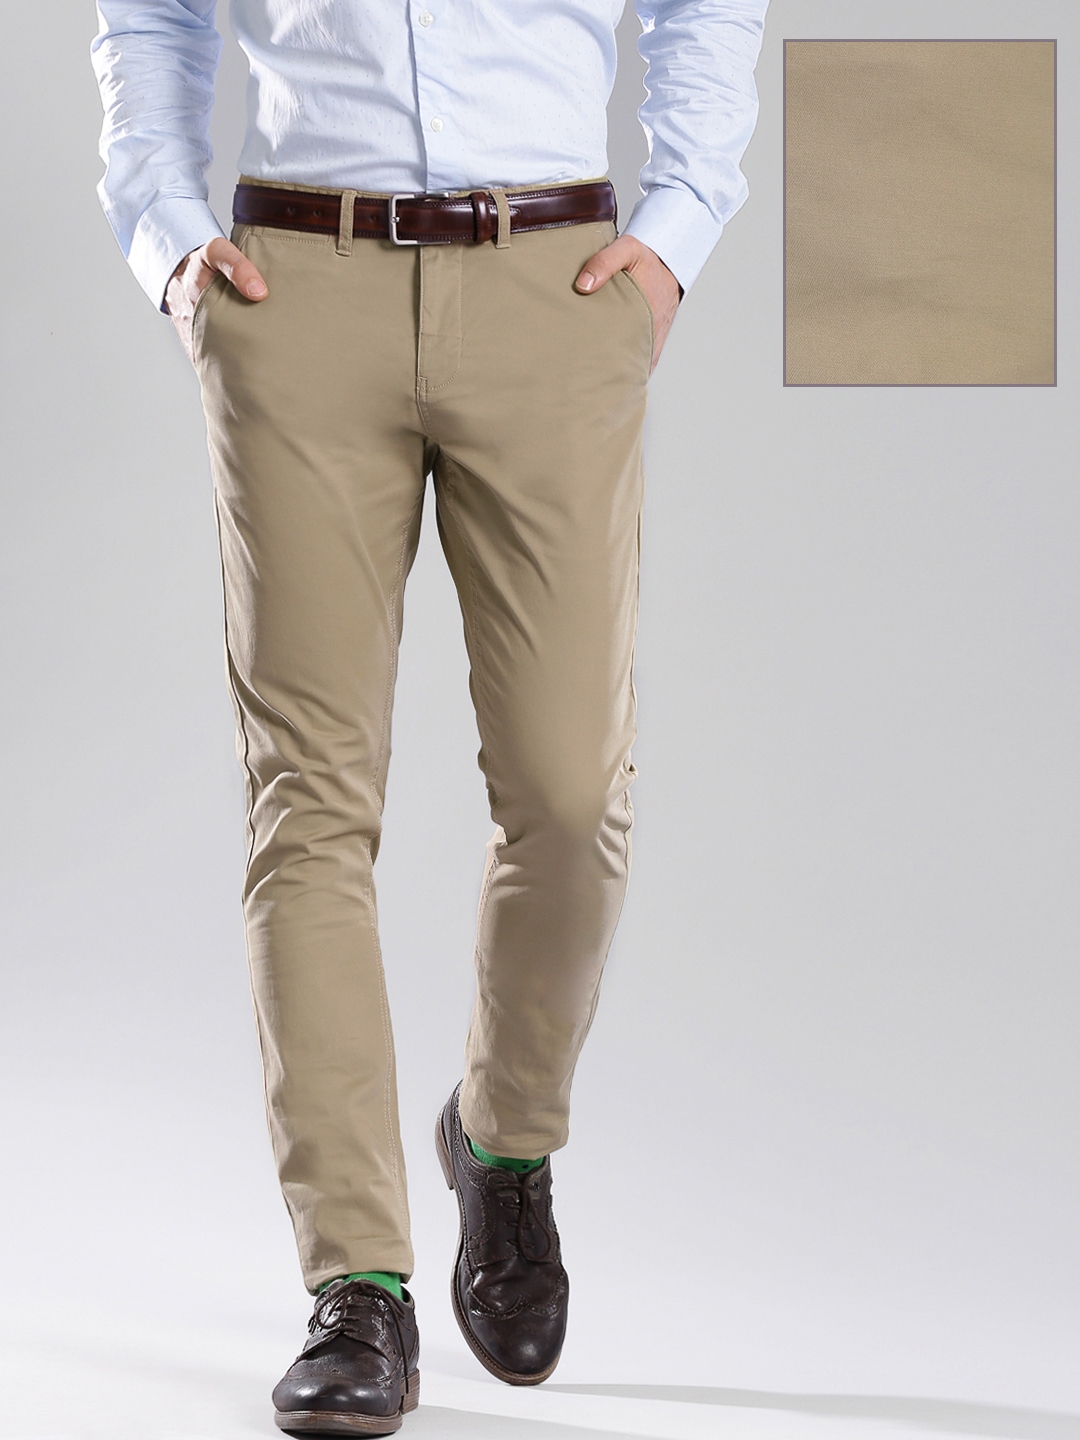 Buy UNITED COLORS OF BENETTON Grey Solid Cotton Stretch Slim Fit Mens  Trousers  Shoppers Stop